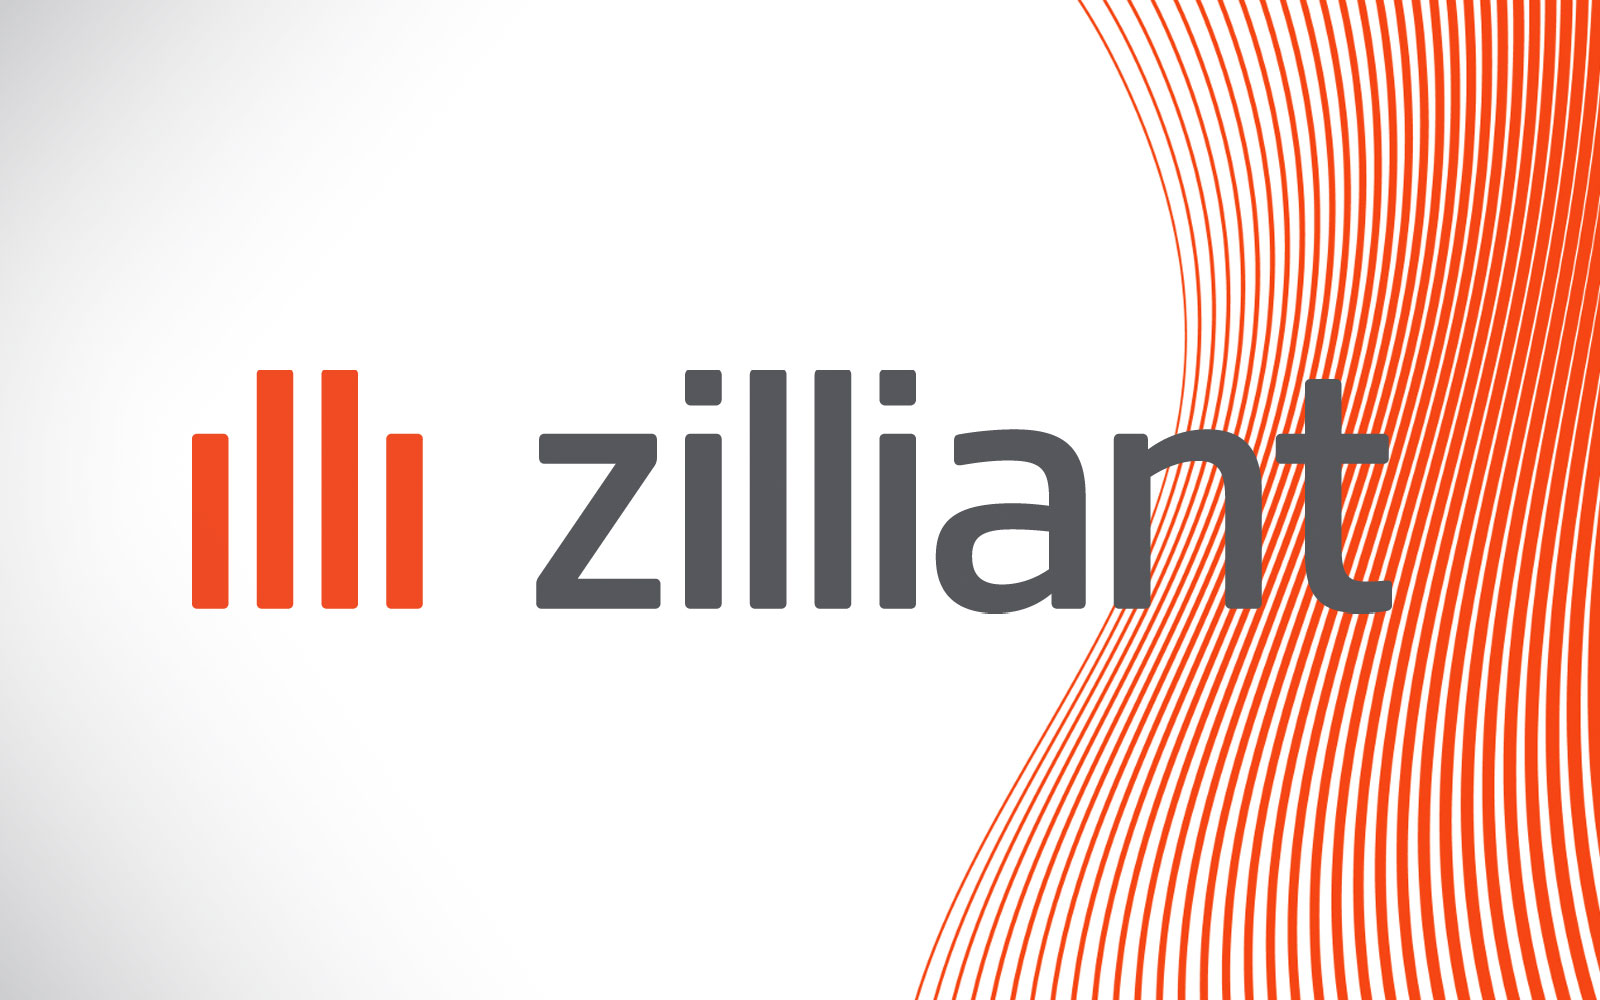 Zilliant Expands Its Leadership Team